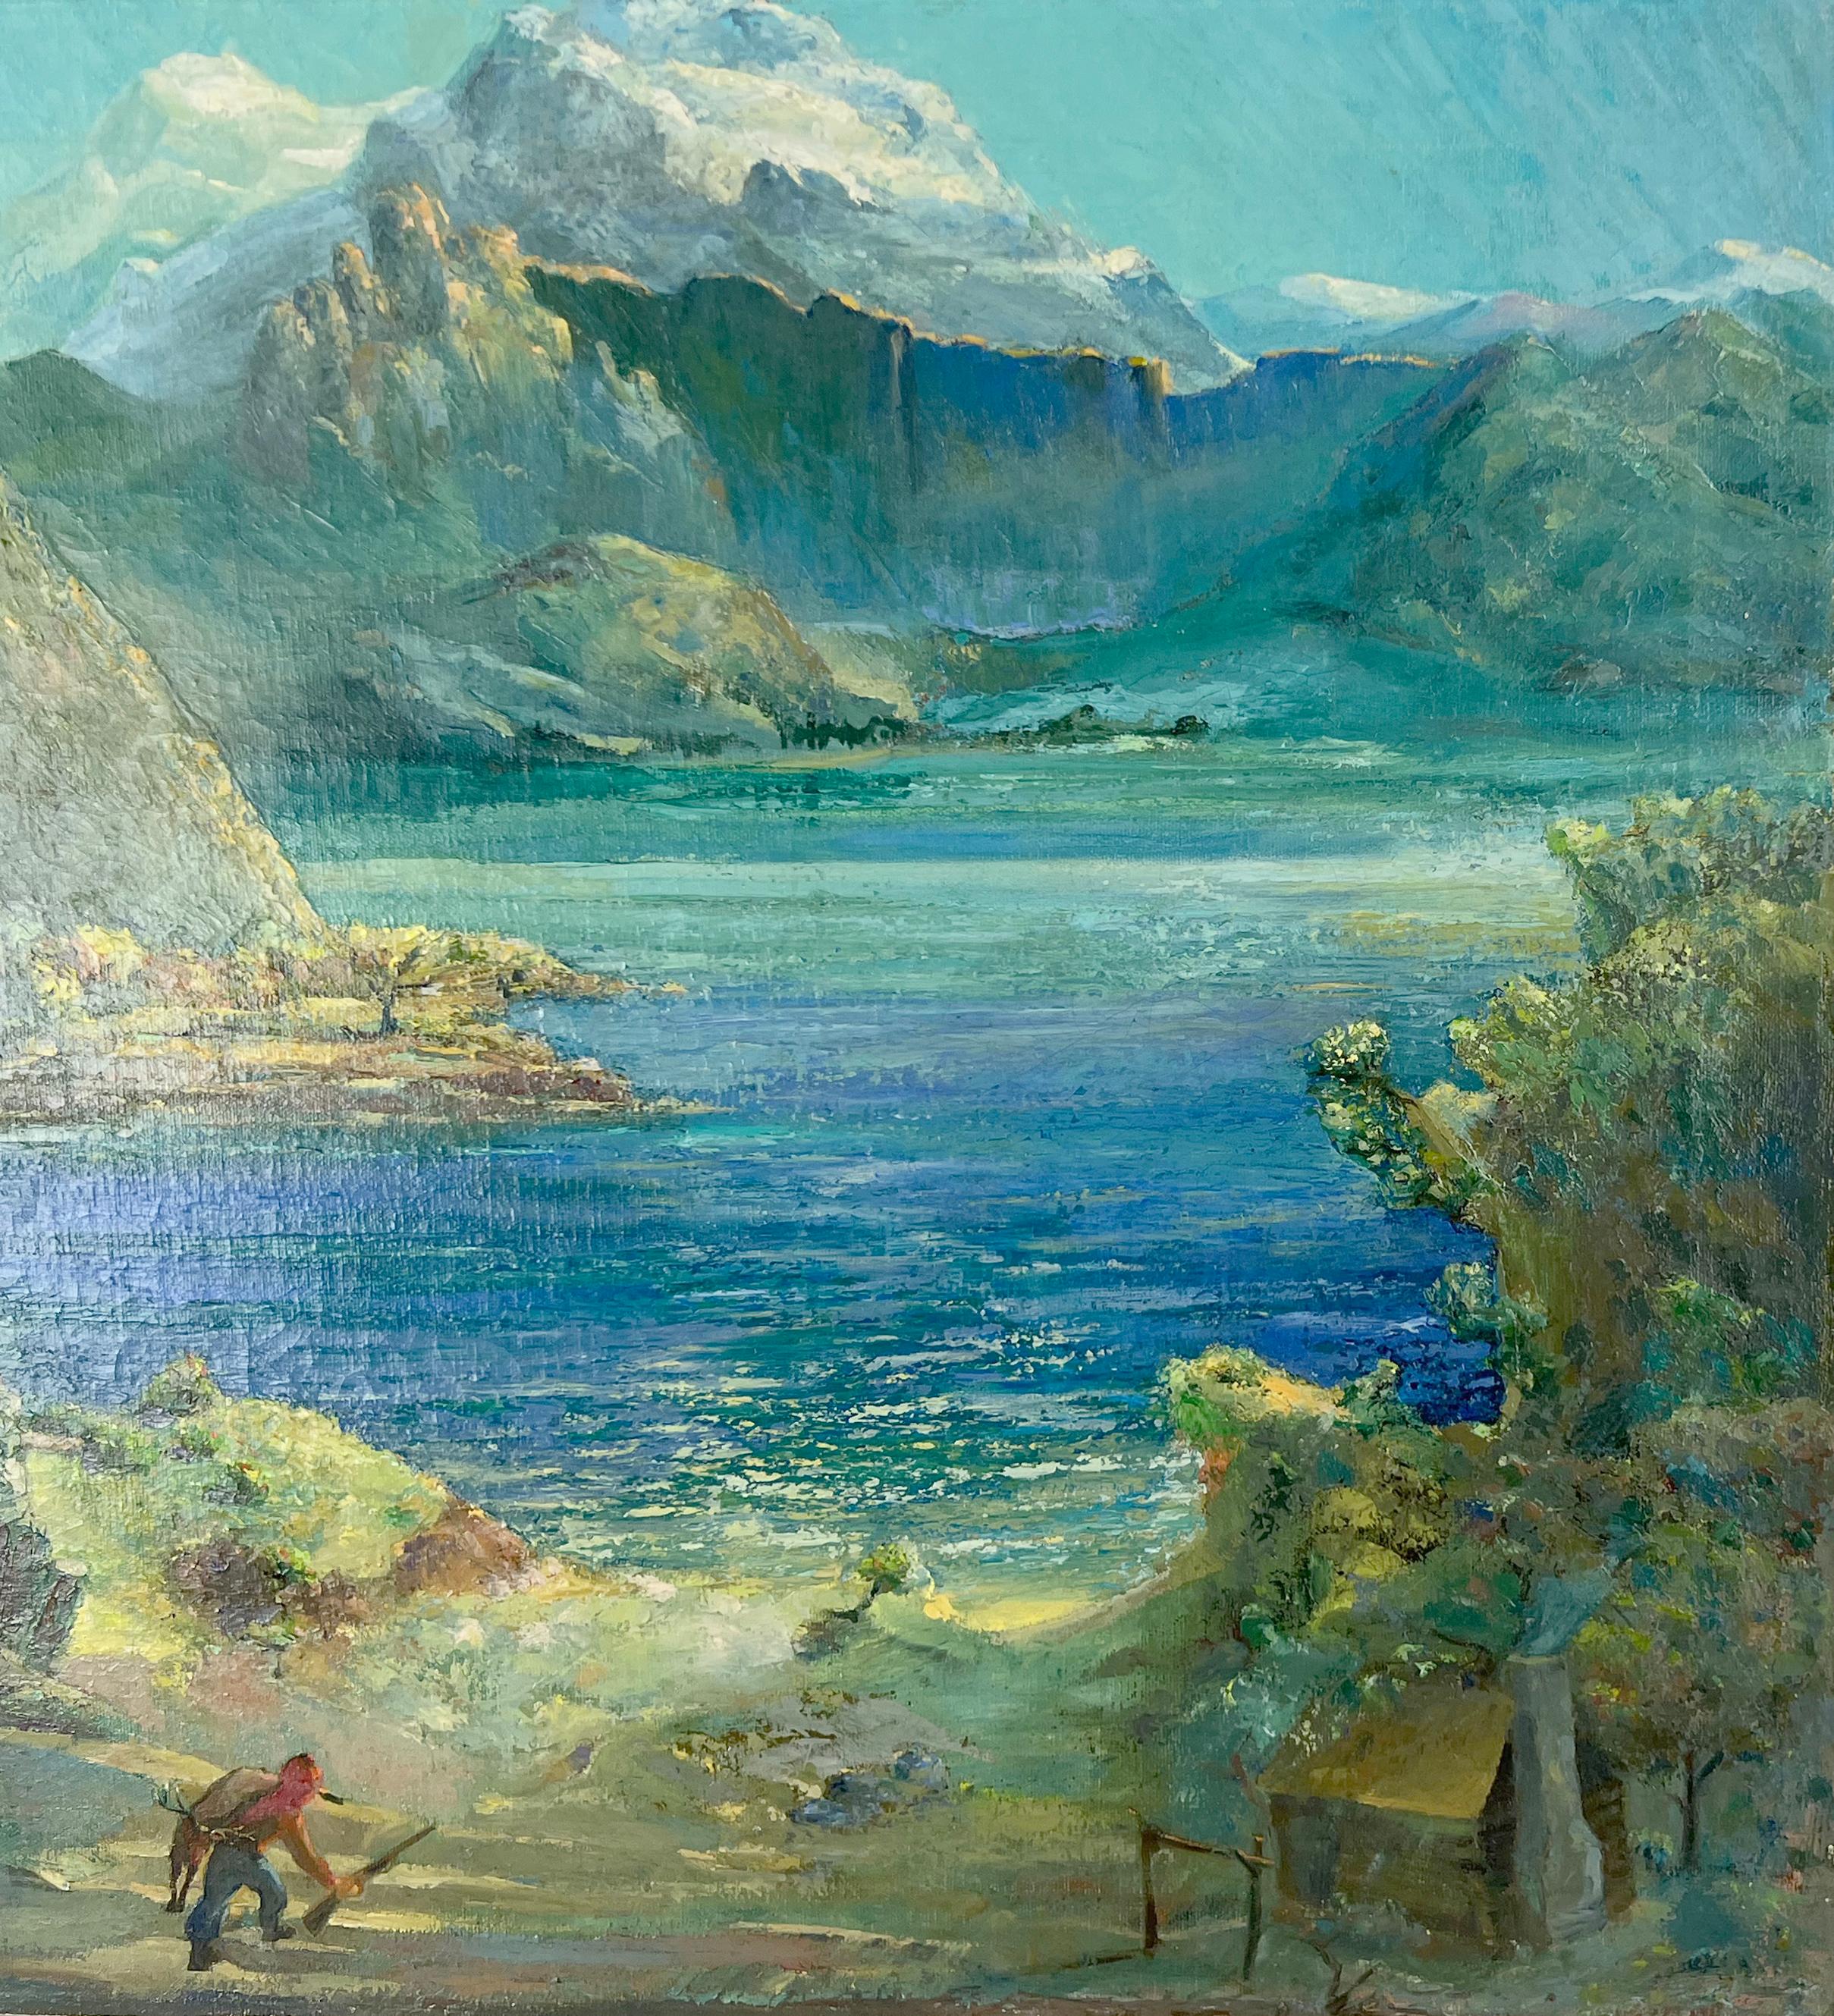 Blue Lake in the Rockies and Hunter - Oil on Linen - Gray Landscape Painting by Verne Byer